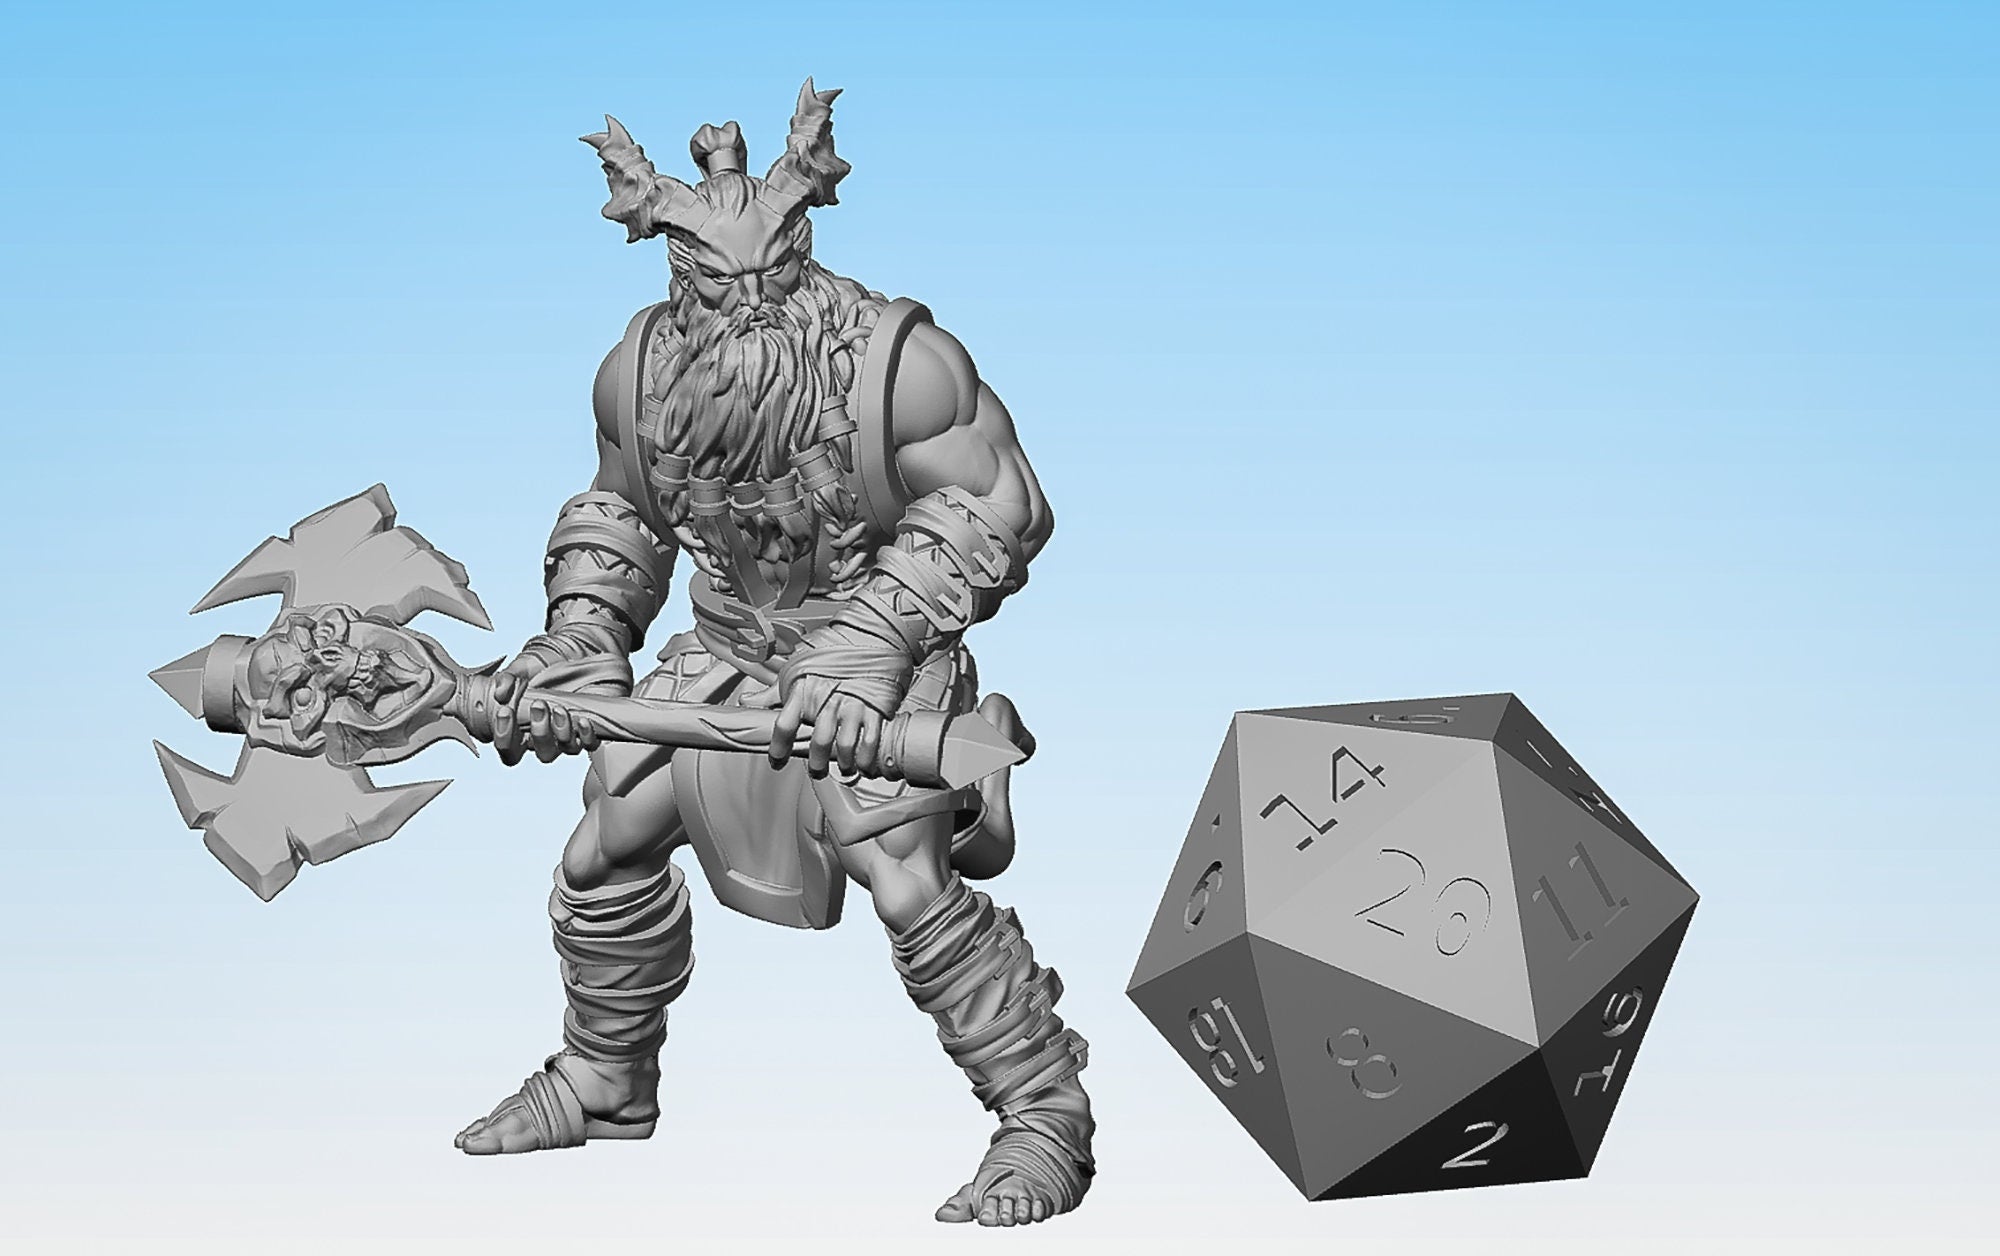 Half-Fiend (Tiefling) "Barbarian Two-handed Axe" | Dungeons and Dragons | DnD | Pathfinder | Tabletop | RPG | Hero Size | 28 mm-Role Playing Miniatures